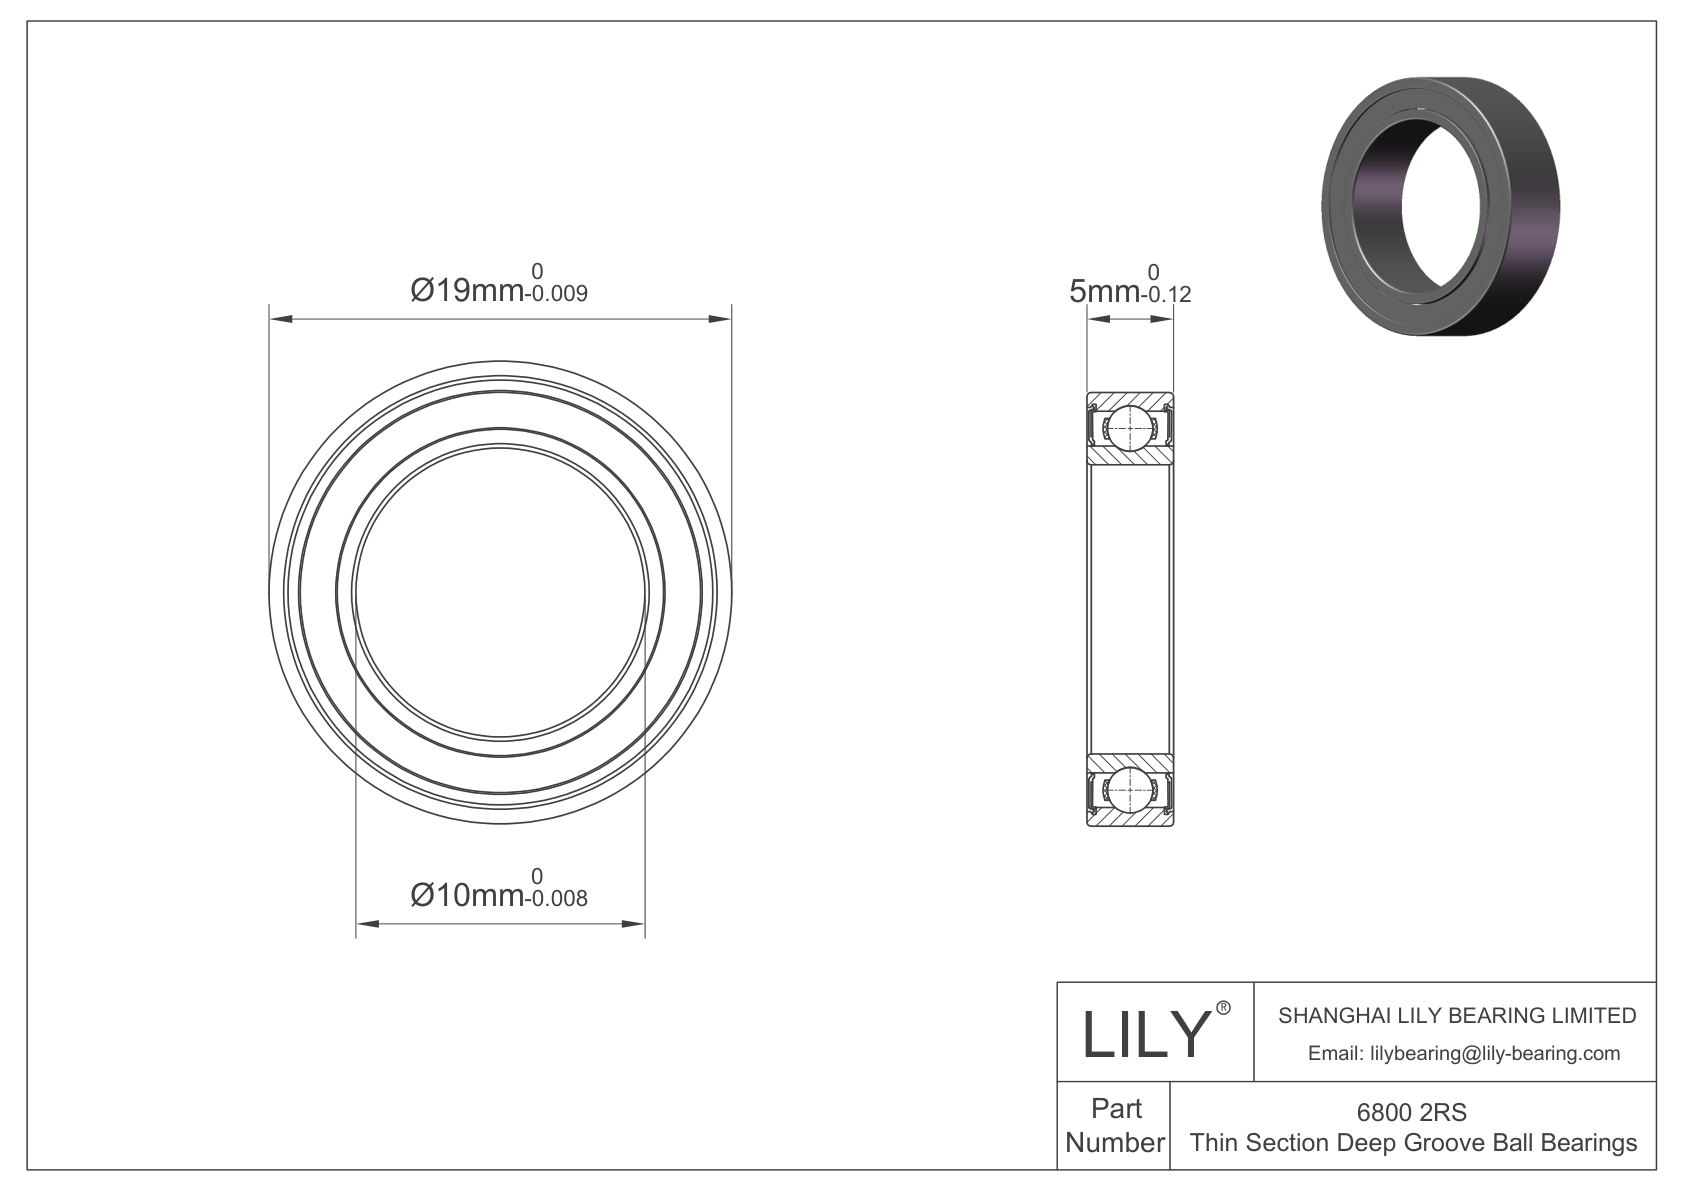 LILY-BST680035-30 Outsourcing POM bearings cad drawing